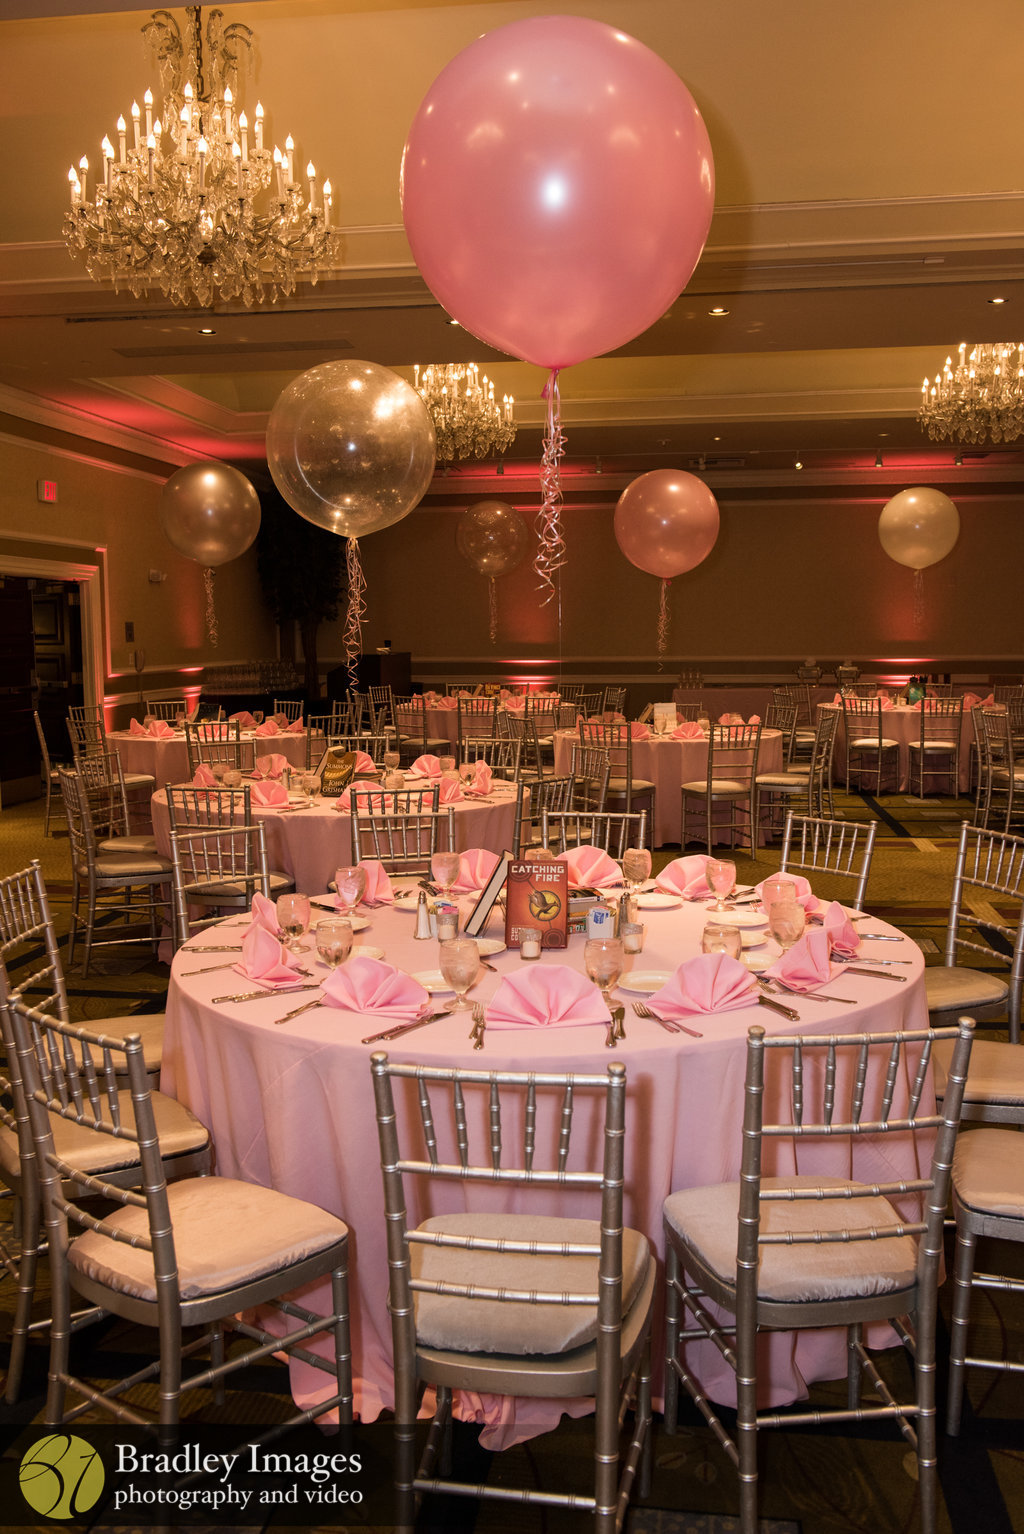 Balloon and book centerpieces at Lindsey's pink book themed Bat Mitzvah party at DoubleTree Bethesda | Pop Color Events | Adding a Pop of Color to Bar & Bat Mitzvahs in DC, MD & VA | Photo by Bradley Images